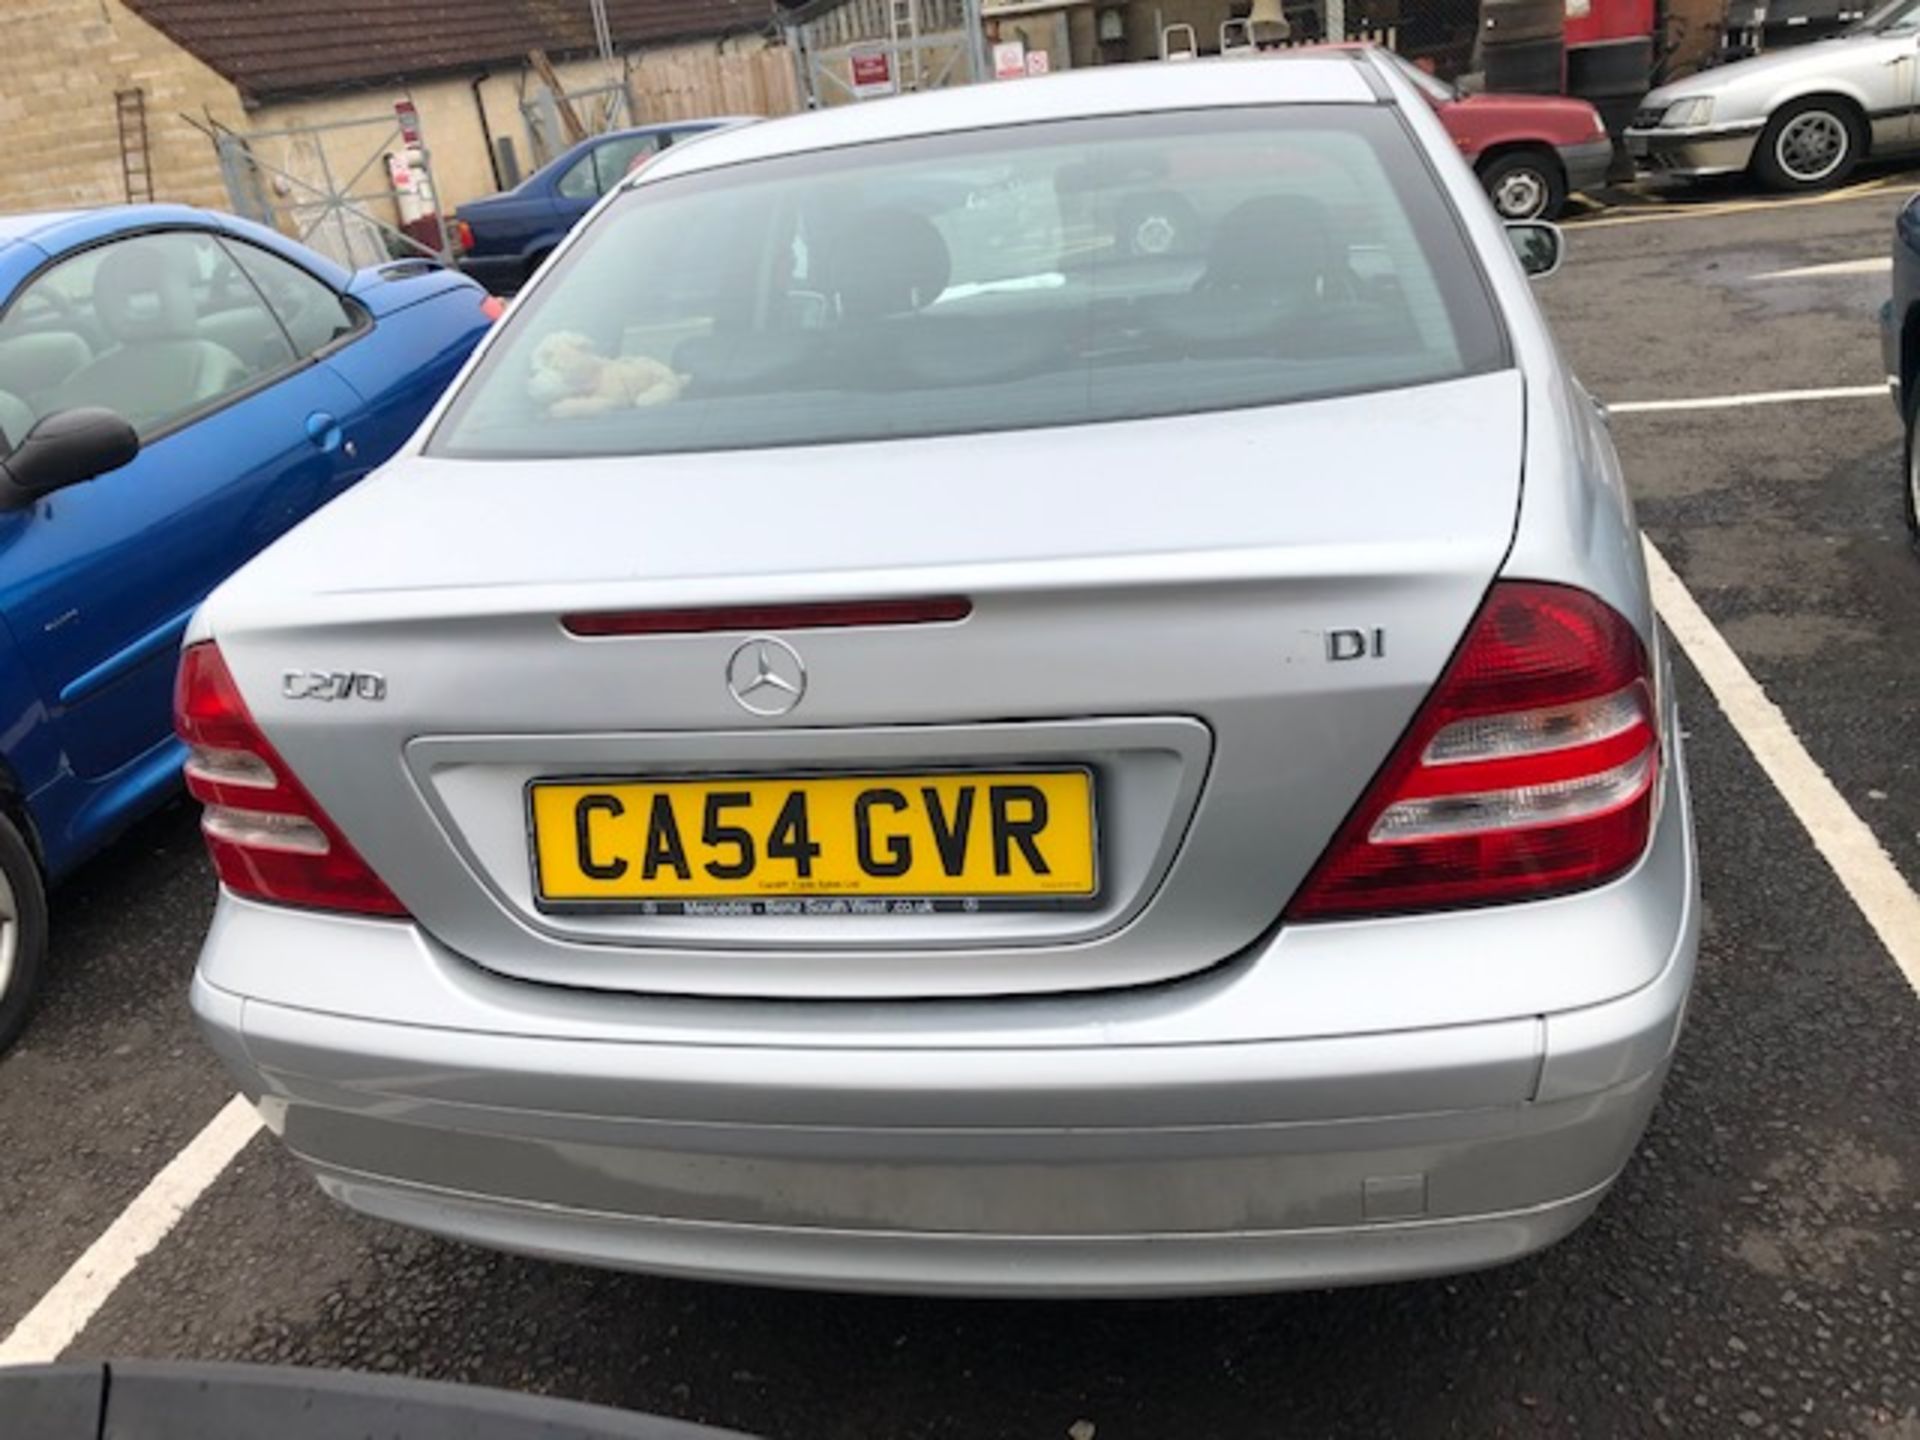 Mercedes C270 4 door saloon CDi Reg No CA54 GVR. Appears to be complete and in relatively good - Image 4 of 5